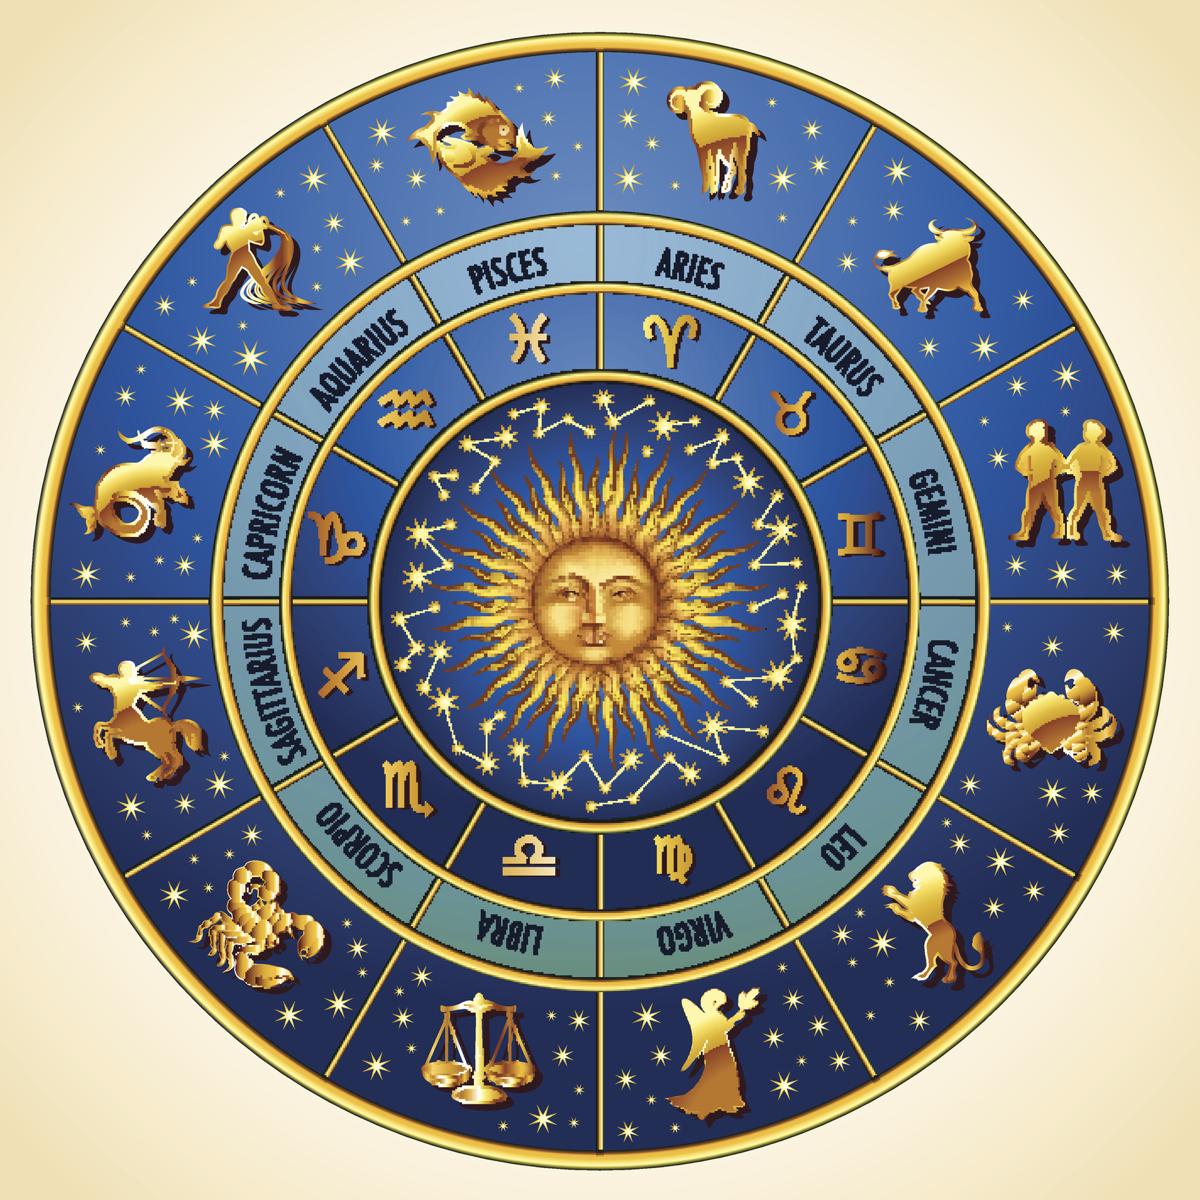 ymbols for astrology signs